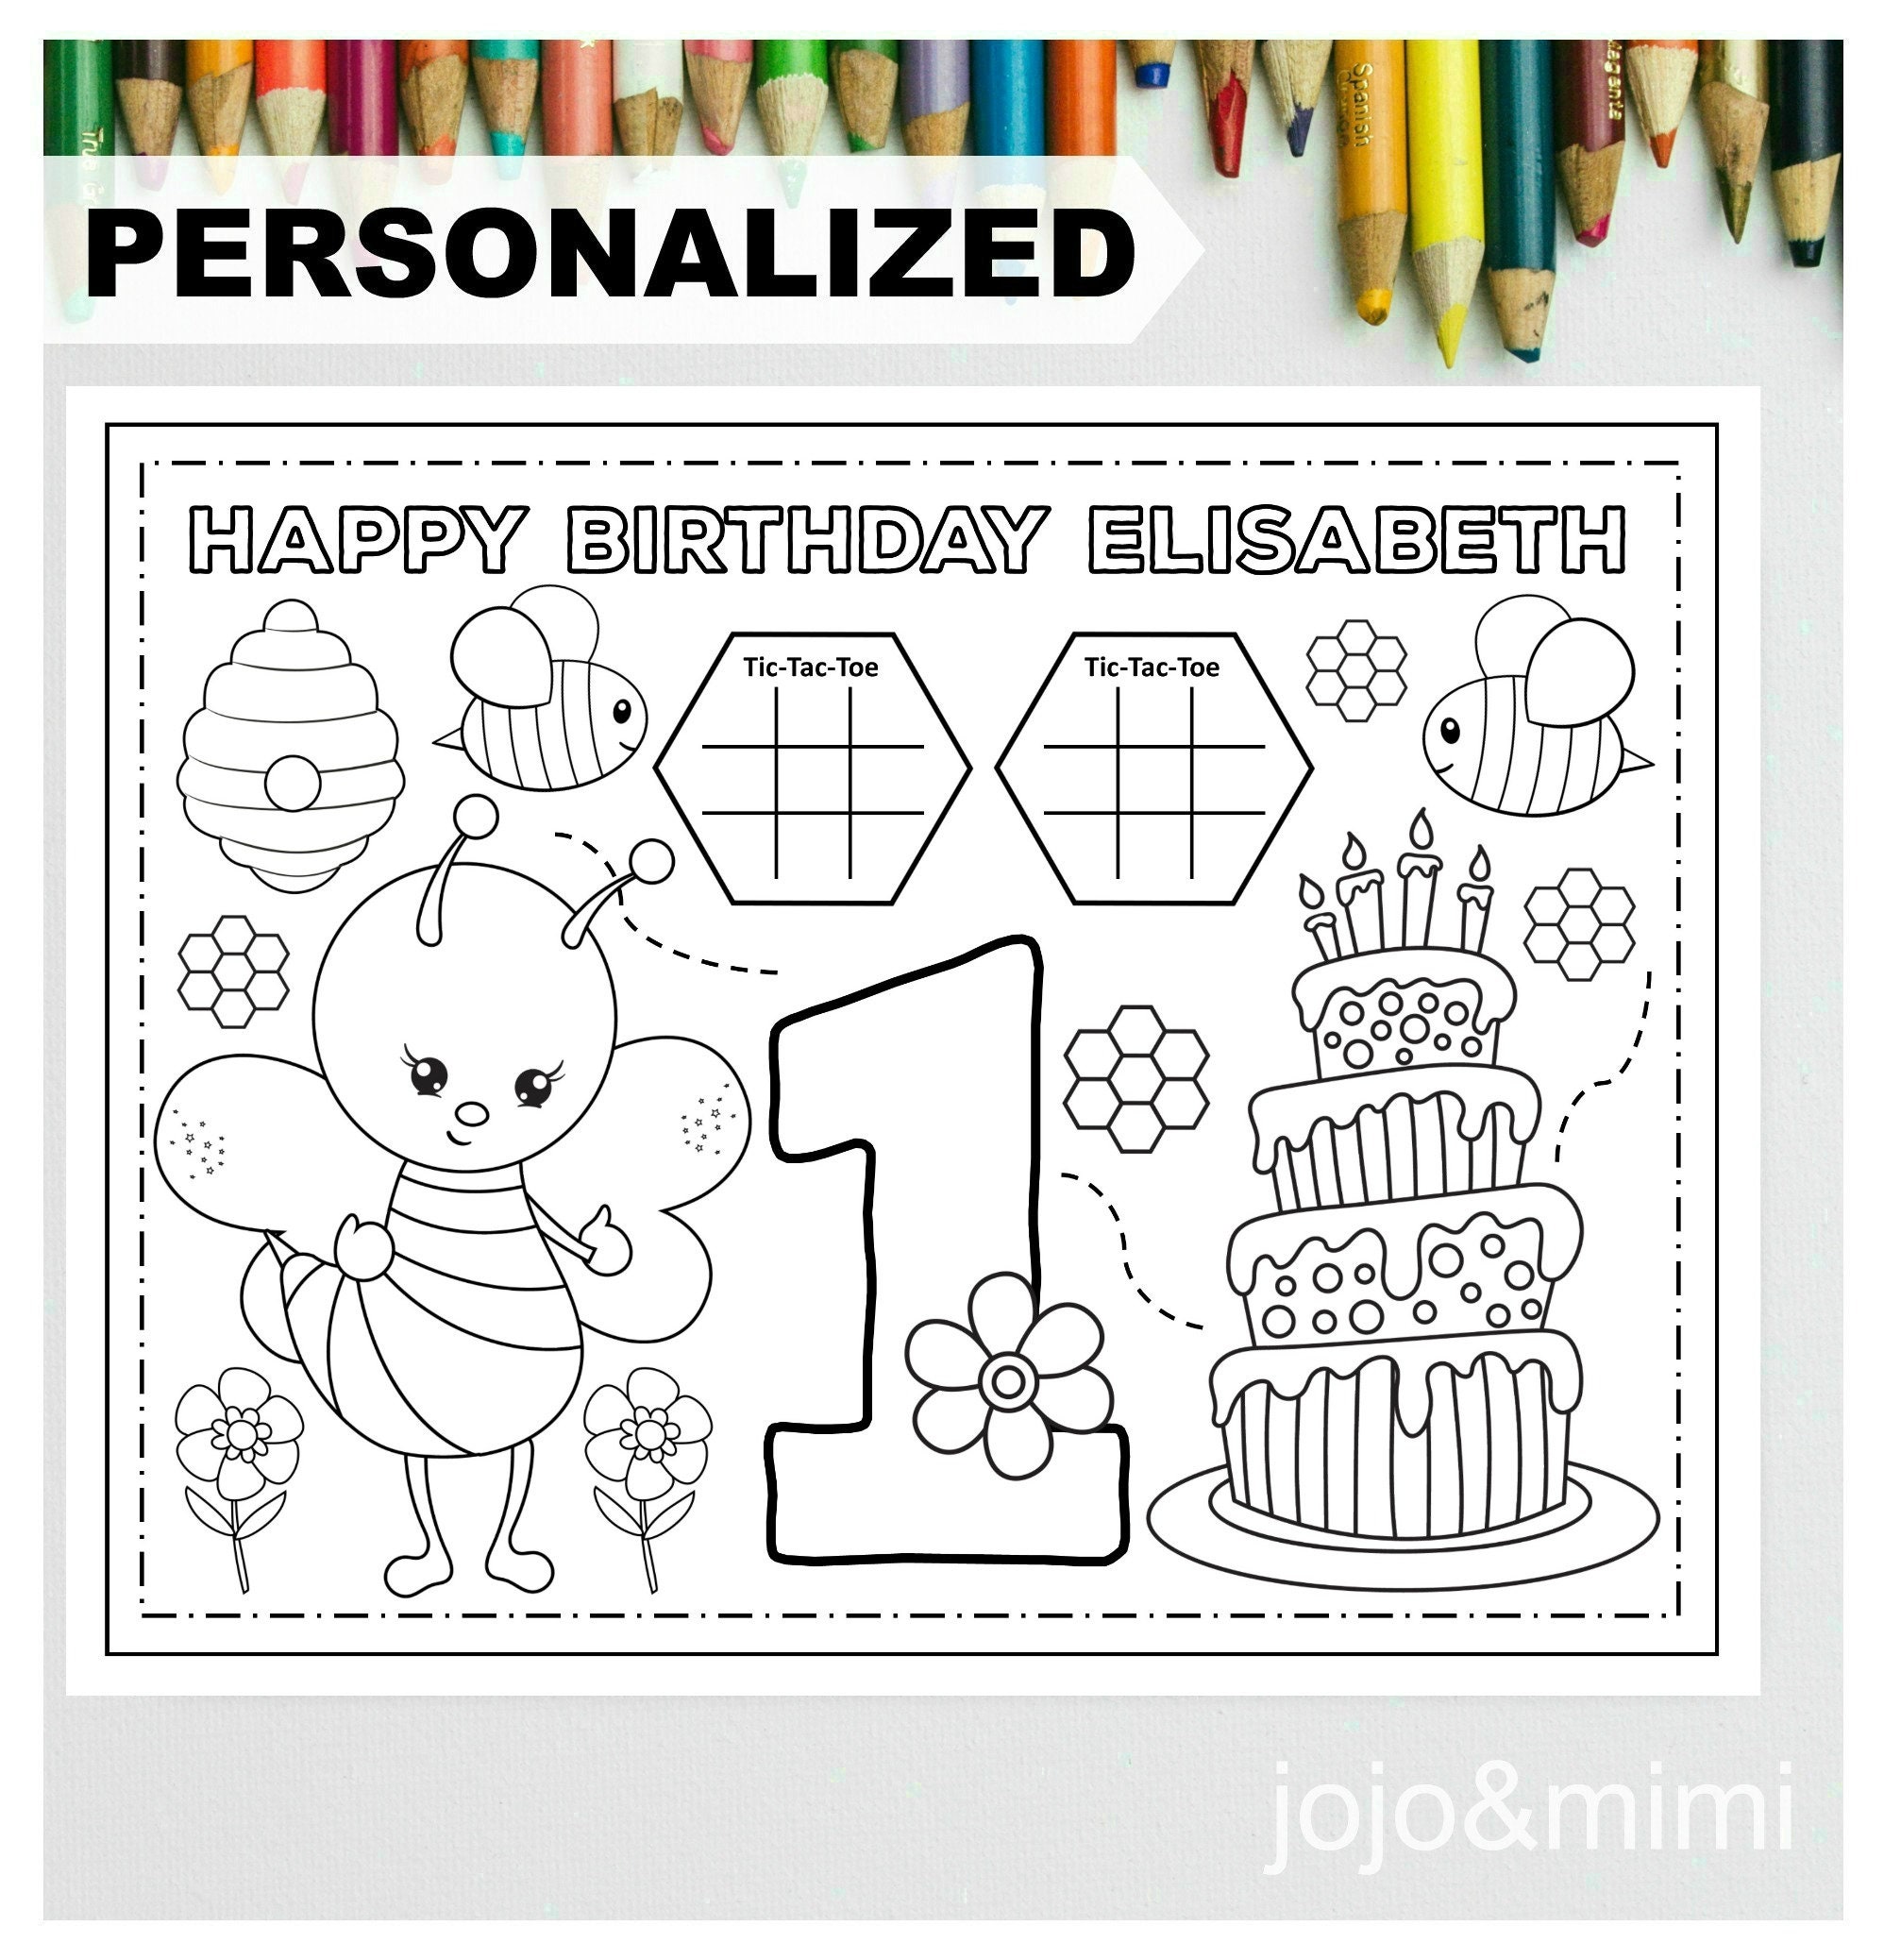 Personalized bee happy birthday printable placemat activity bee theme coloring page kids birthday party placemat first birthday bee birthday